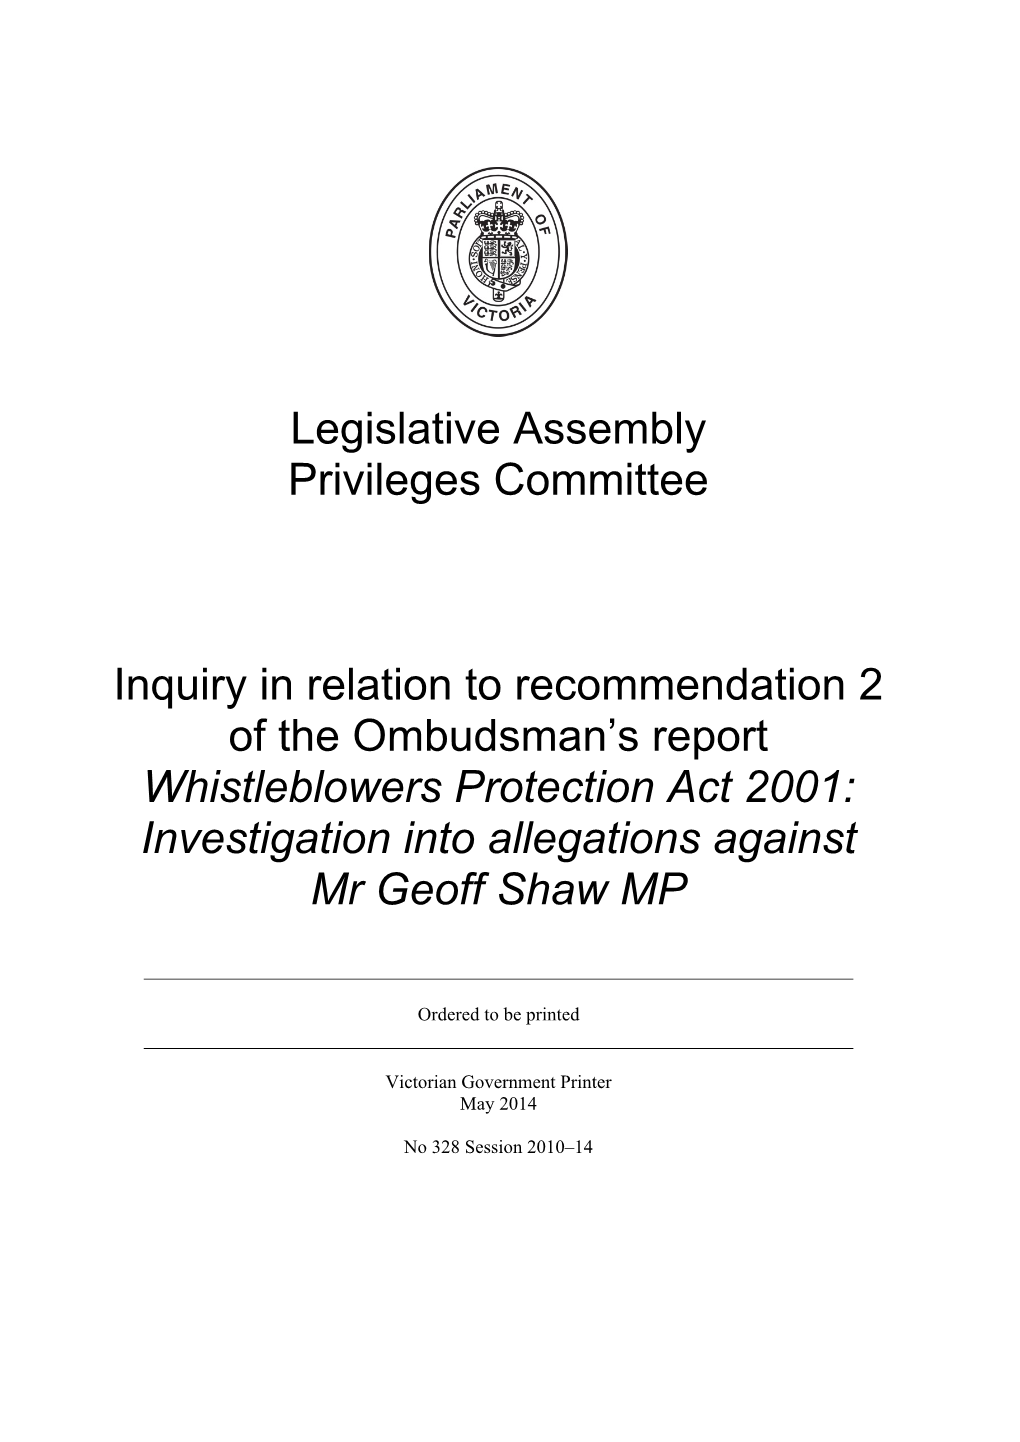 Legislative Assembly Privileges Committee Inquiry in Relation To